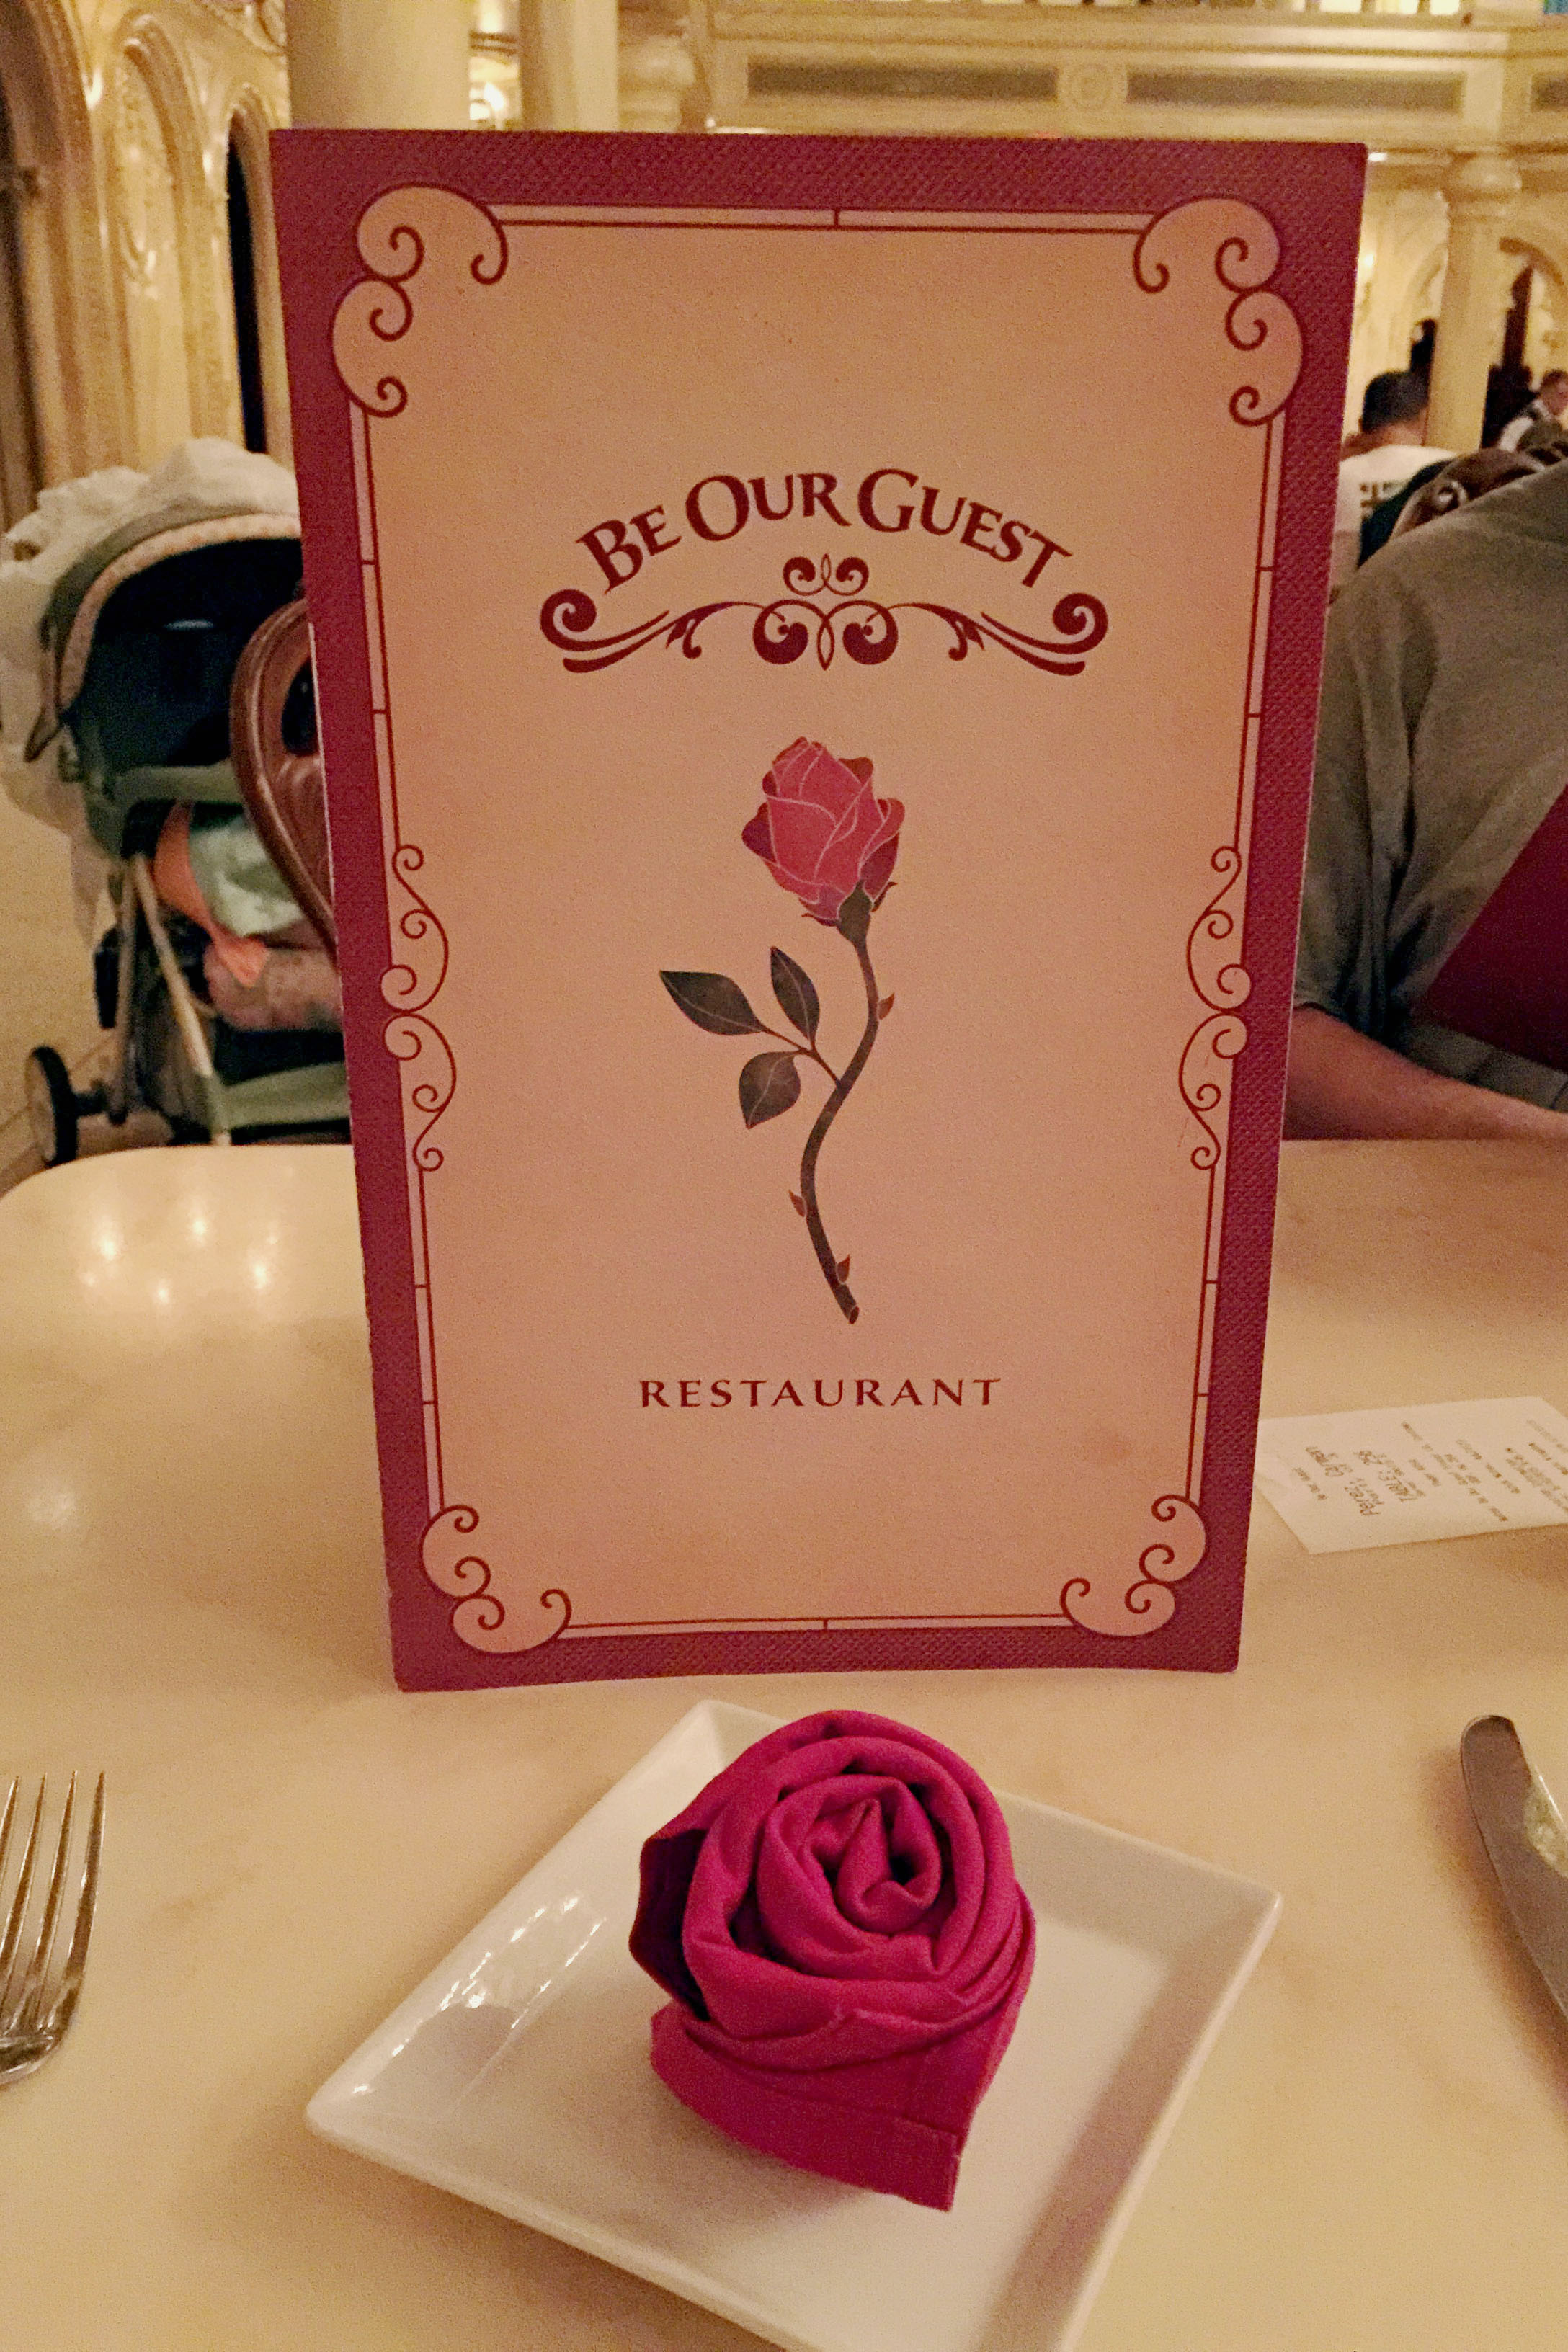 The menu and the rose napkin...nice touch.